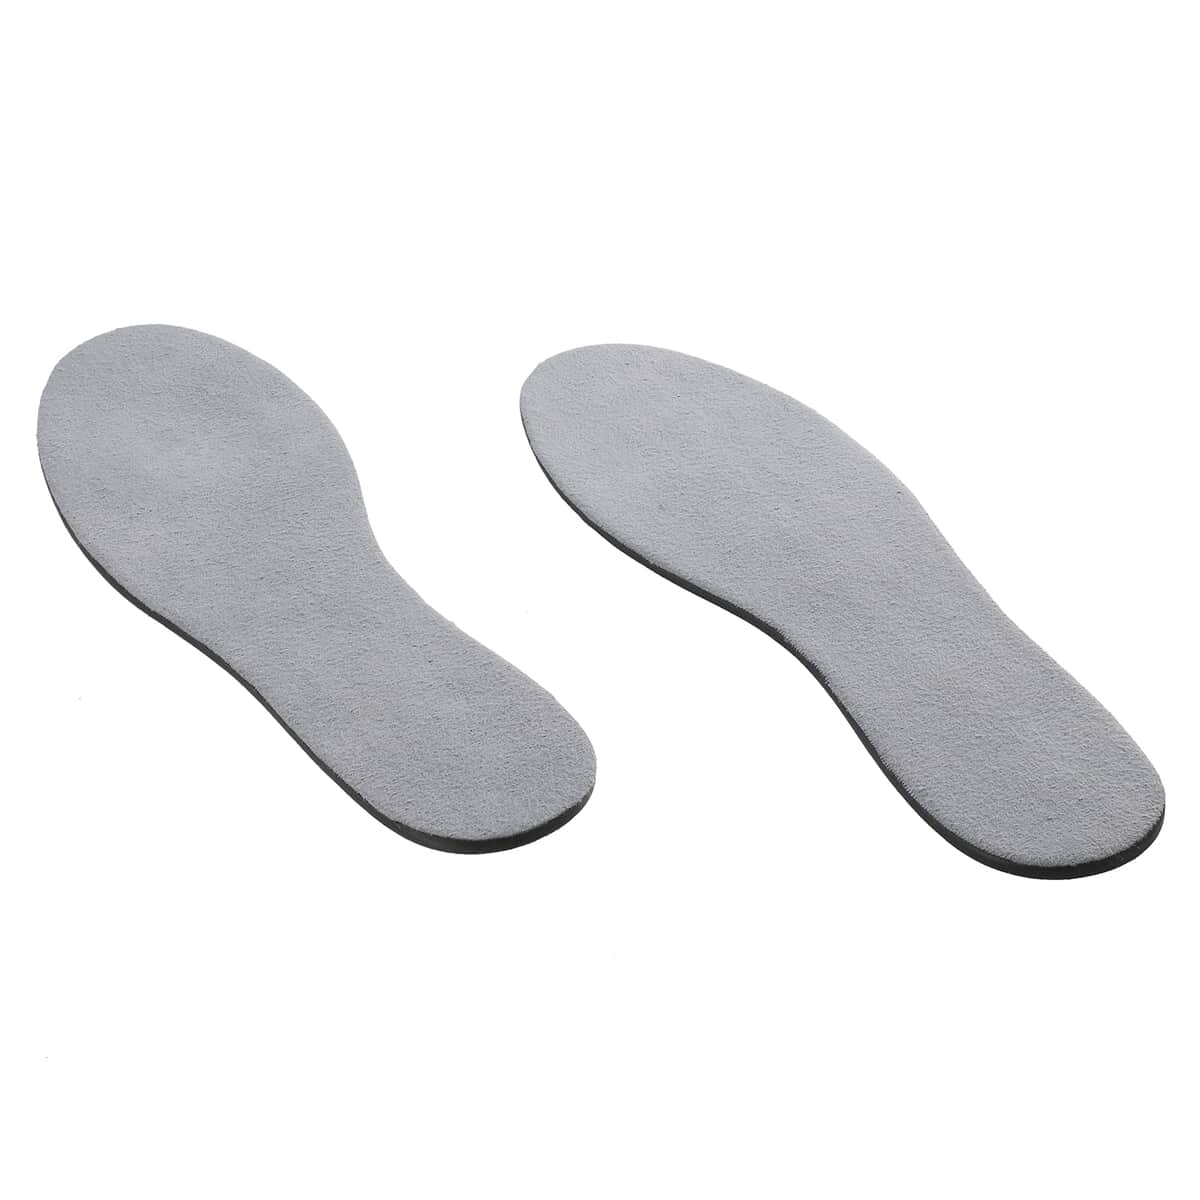 Pair of Gray and Green Shungite Infused Gel Insoles (Uses Gel Polymer) image number 6